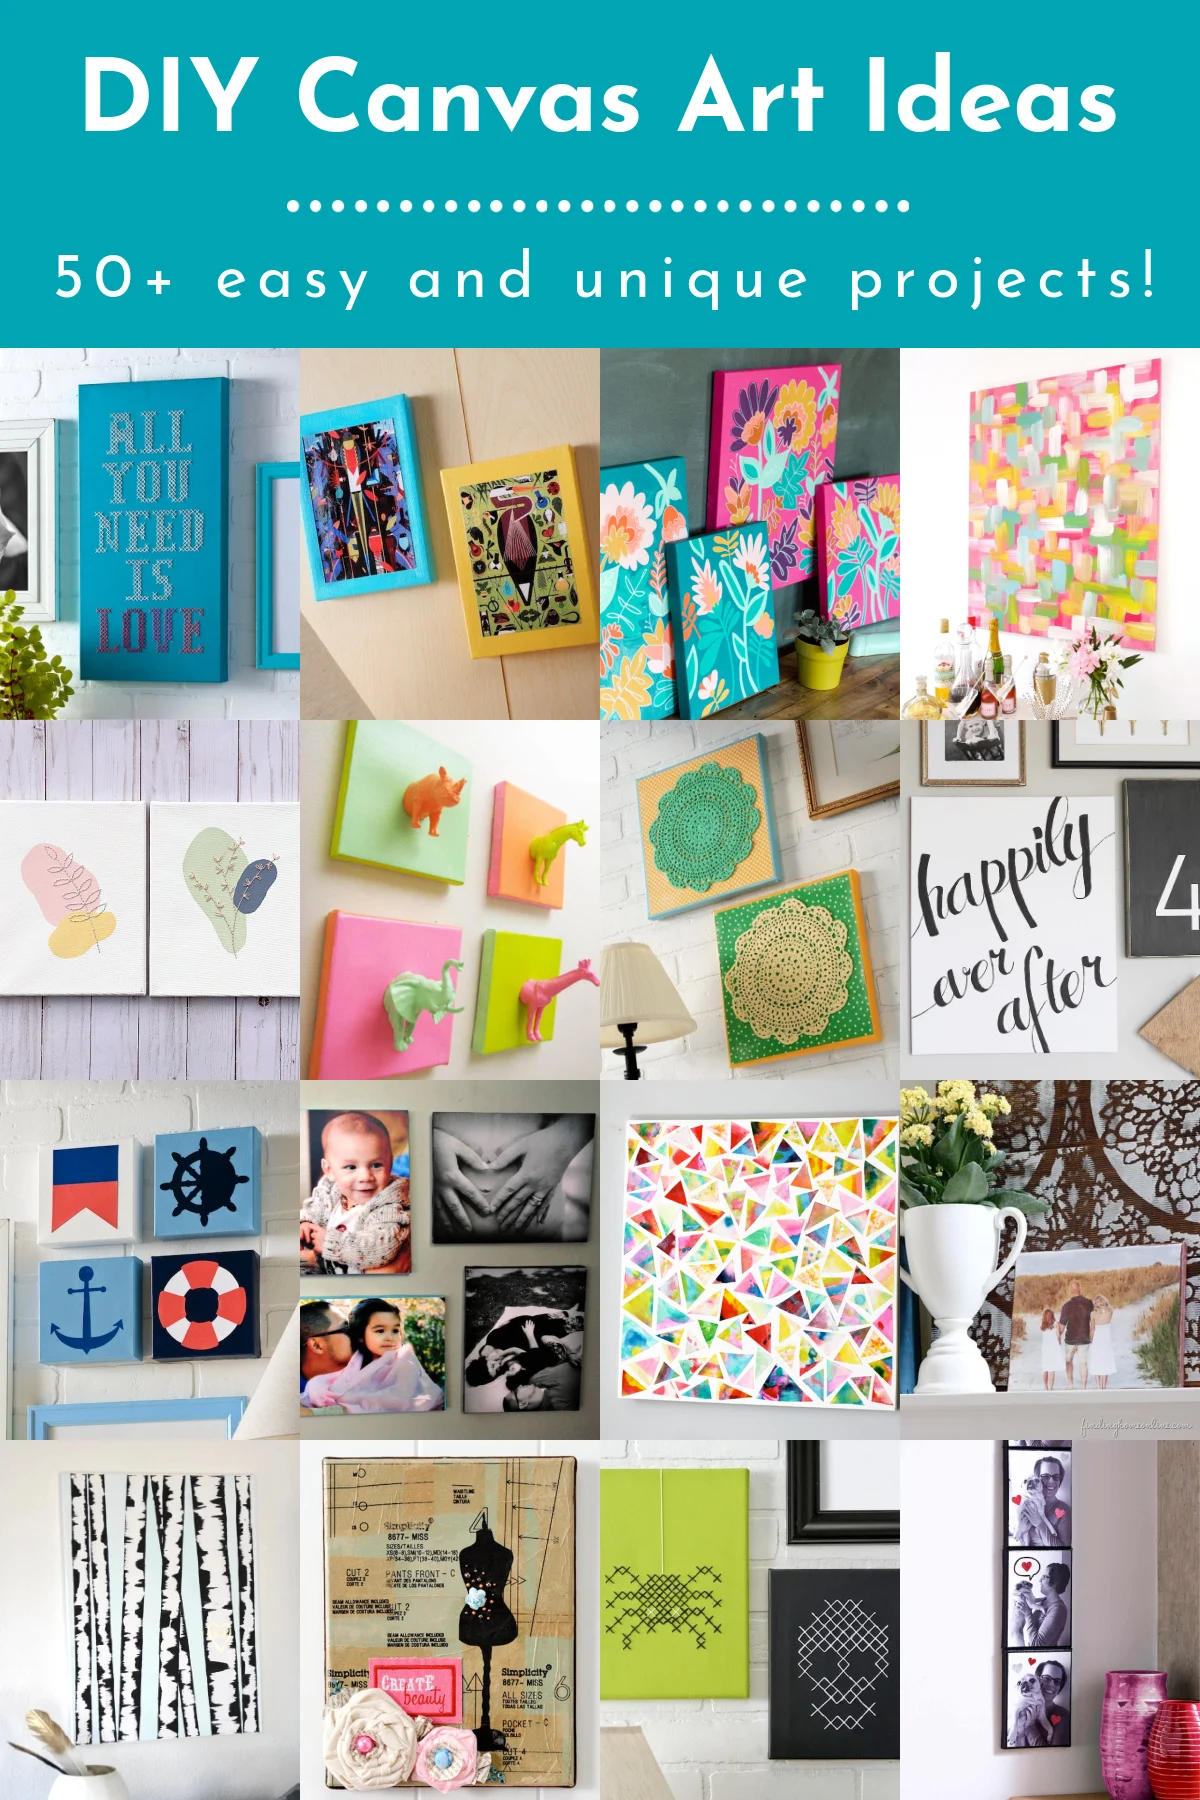 cute painting ideas on canvases